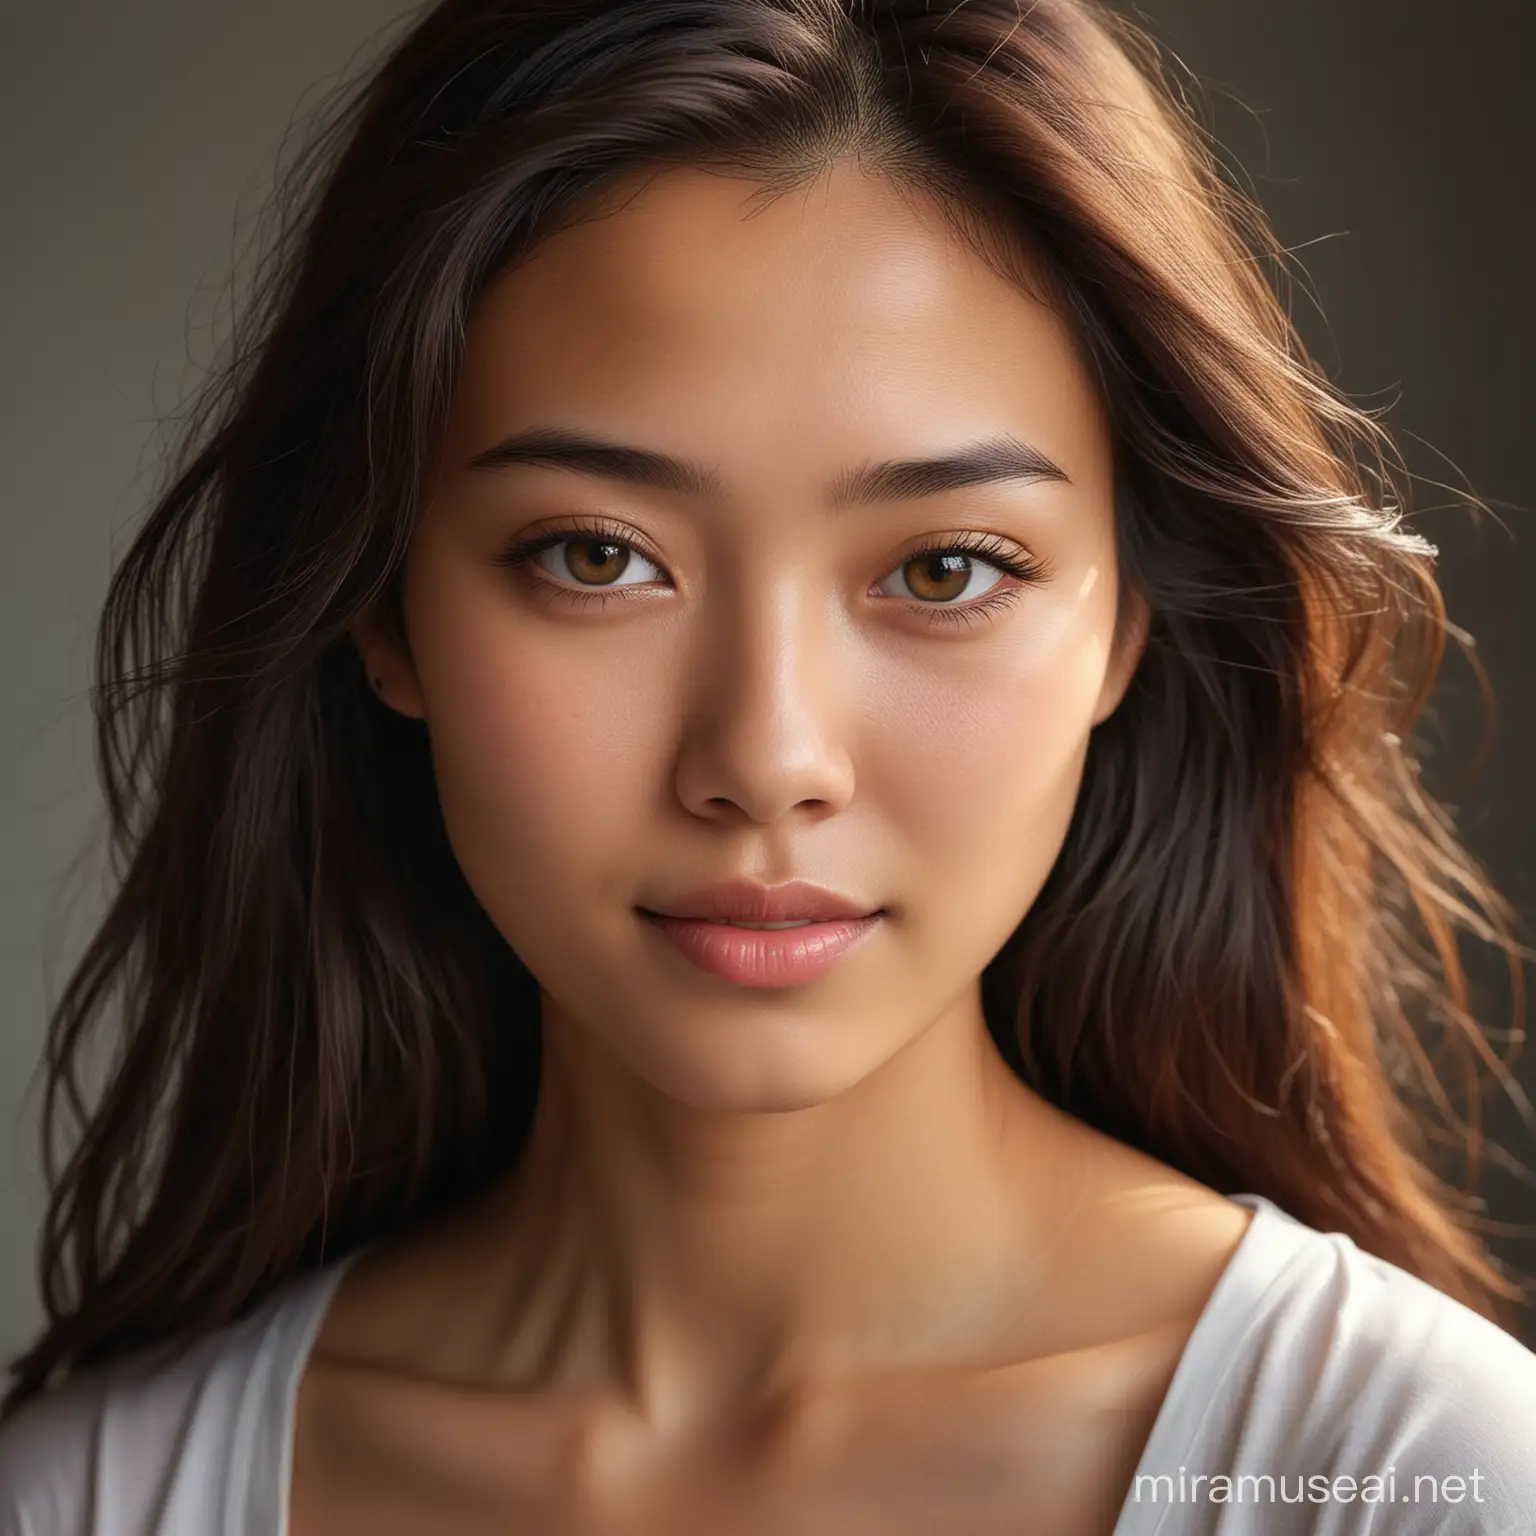 Captivating Thai Mixed Young Woman Portrait in Warm Lighting